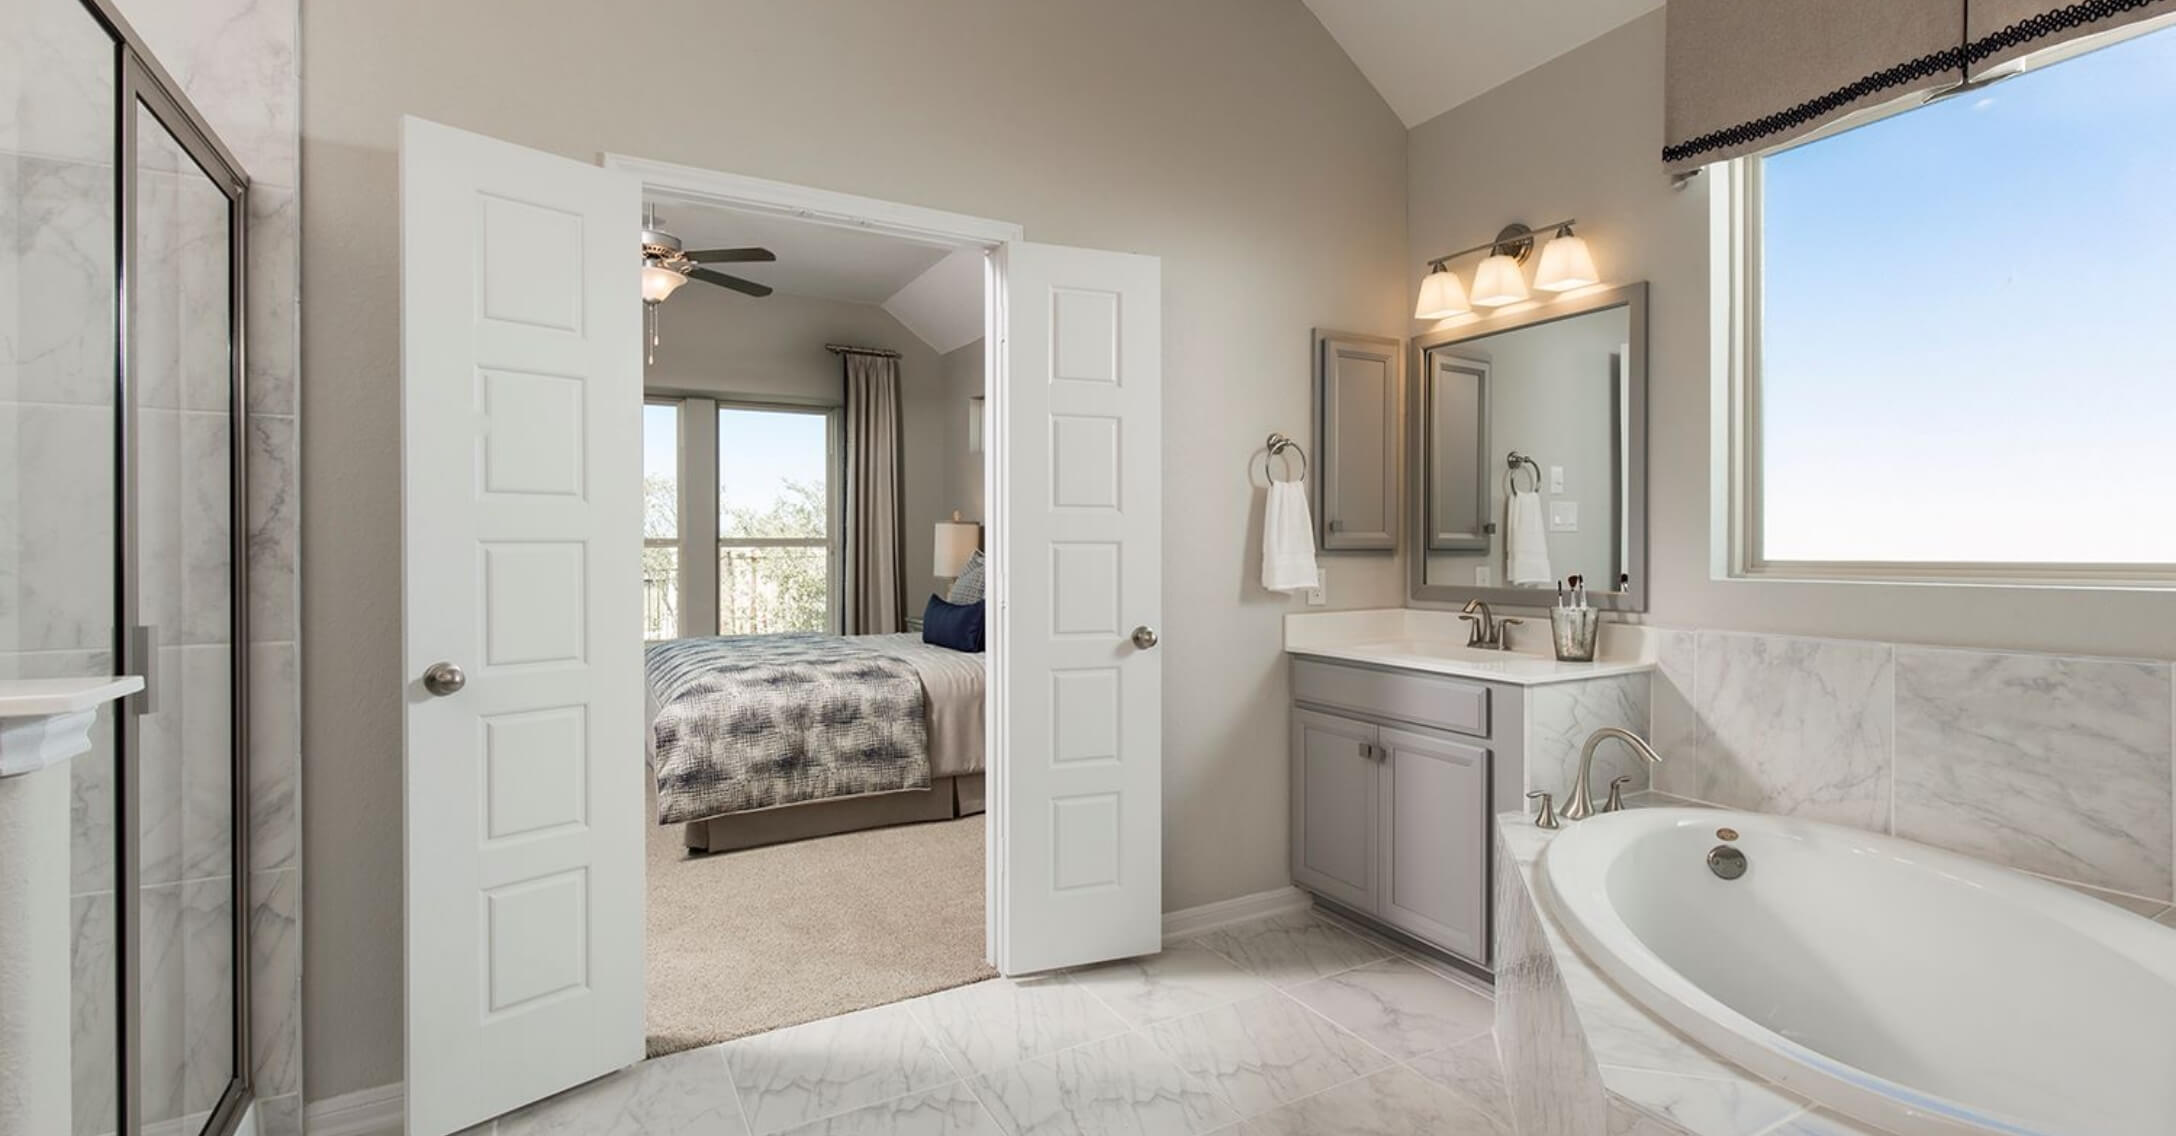 A bathroom with a tub and a walk in shower in Mayfair homes, New Braunfels.